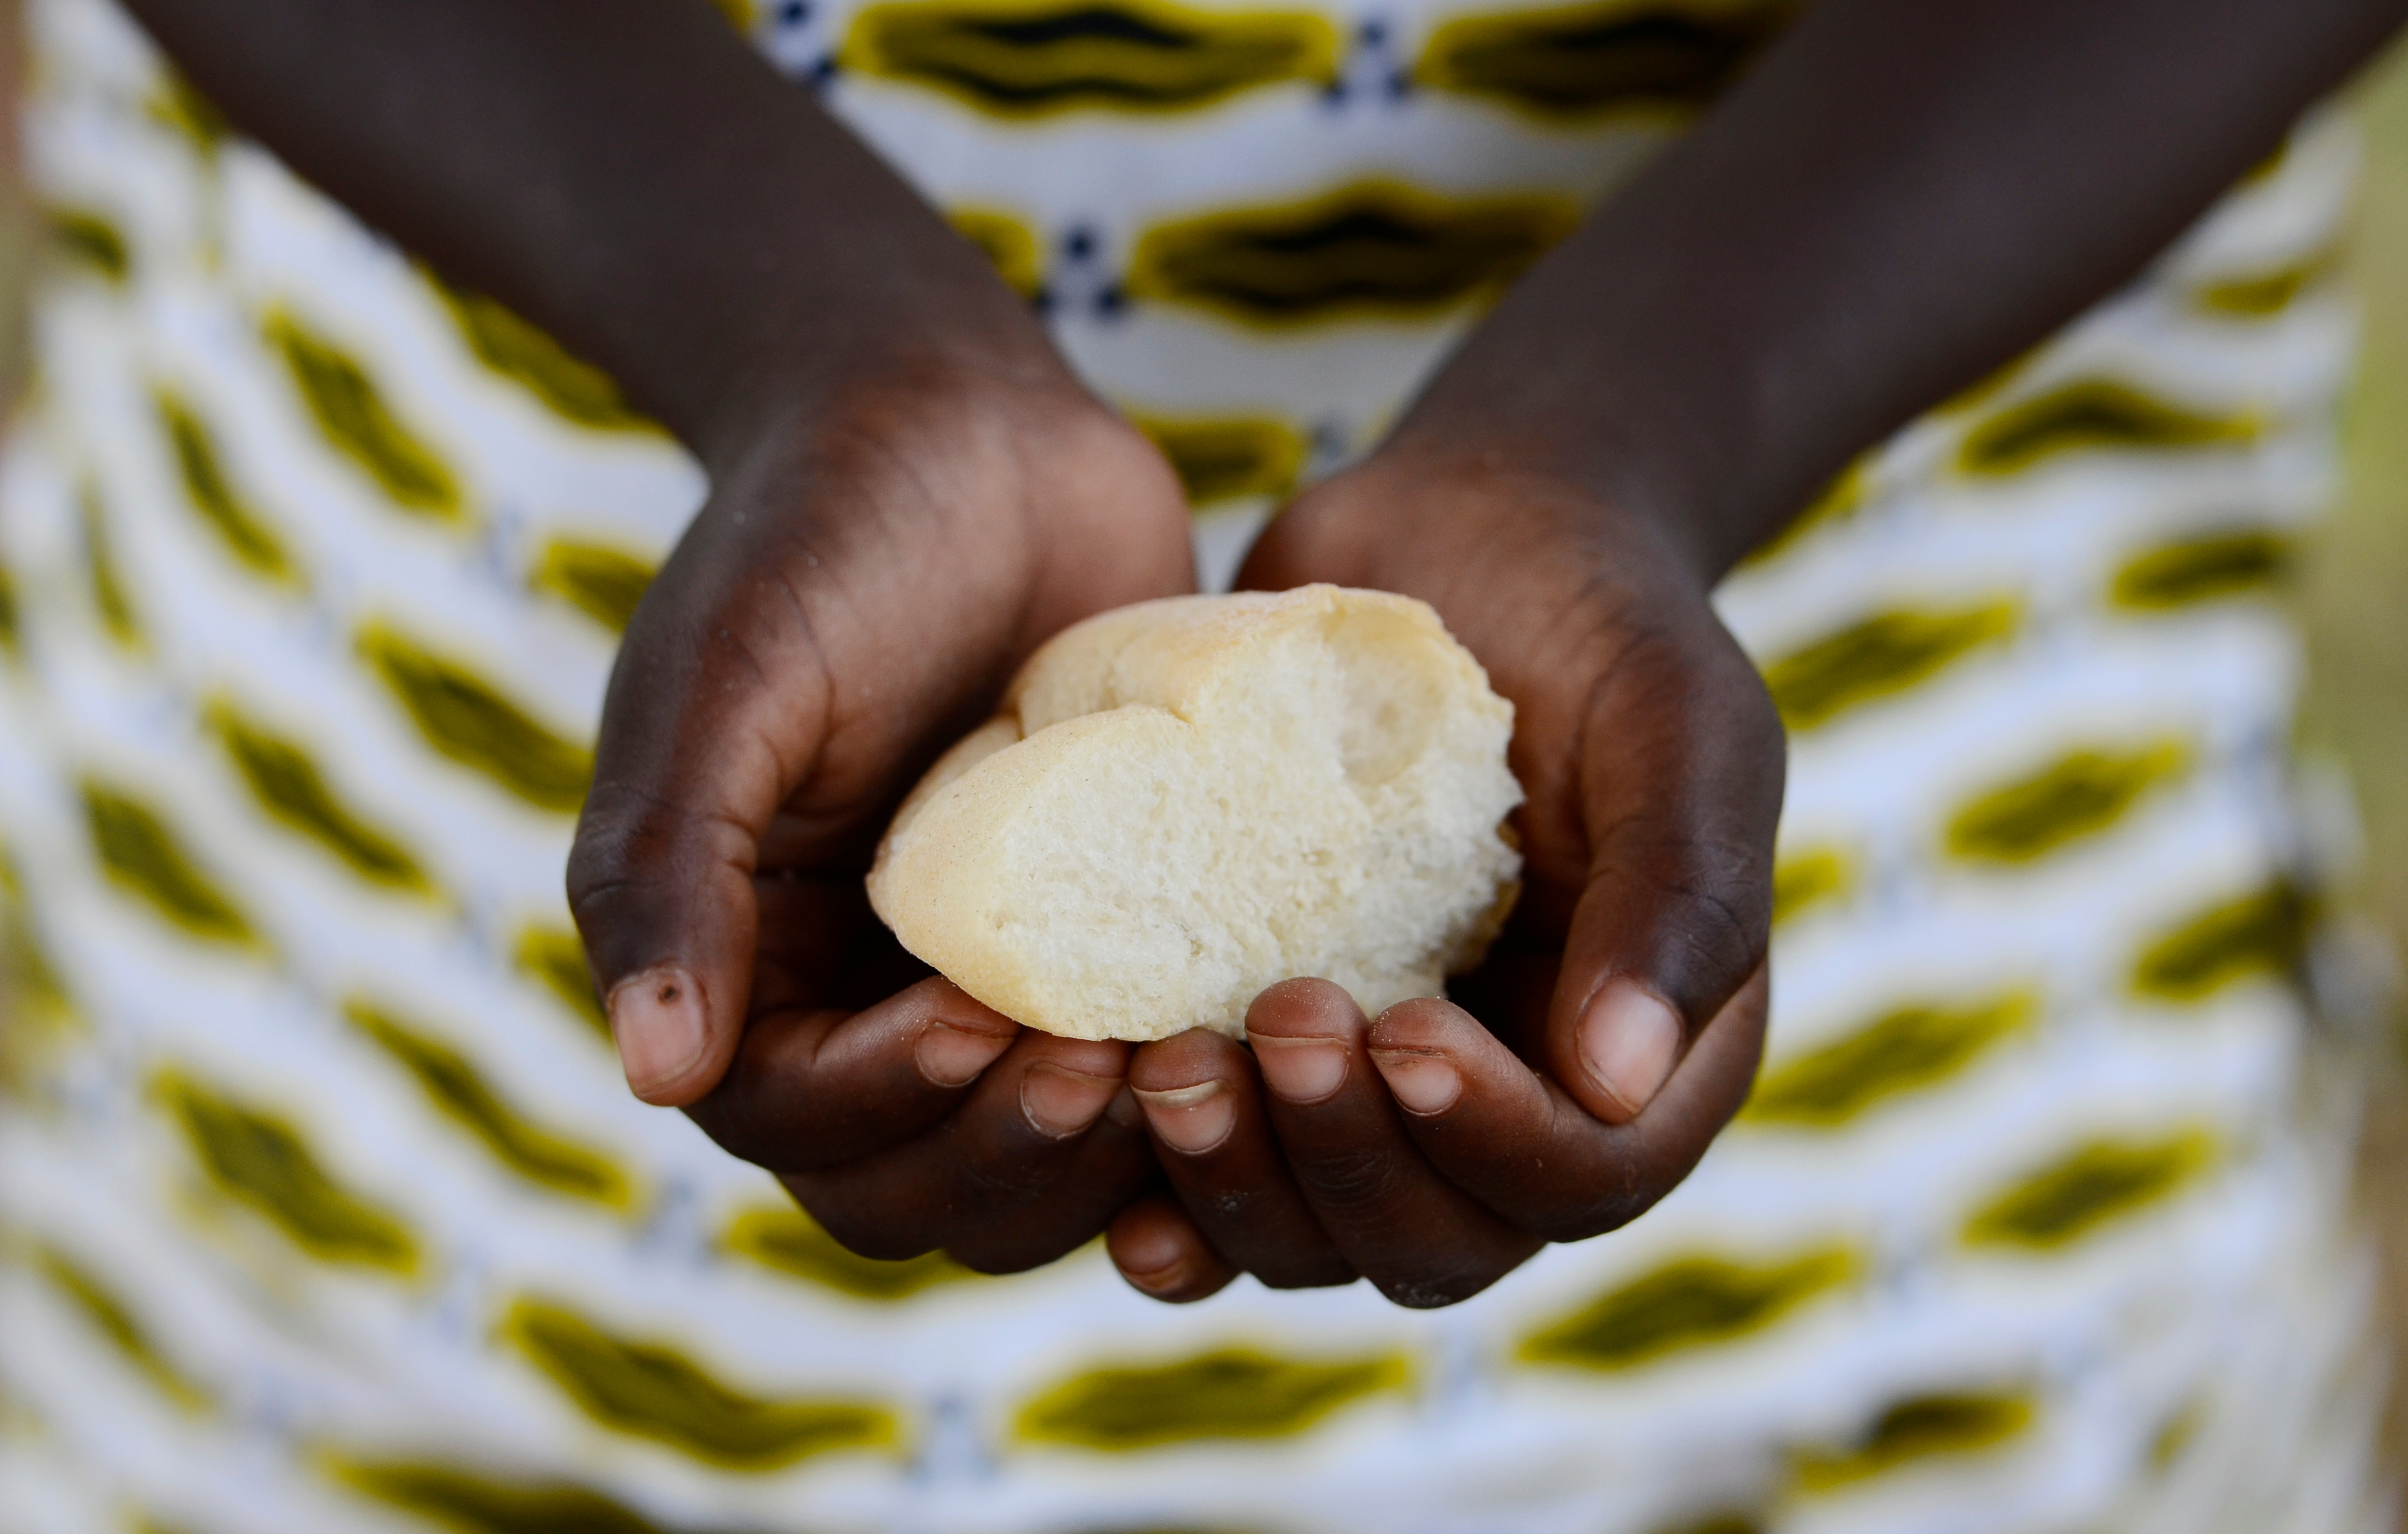 Hands of African woman holding wheat-based food ball